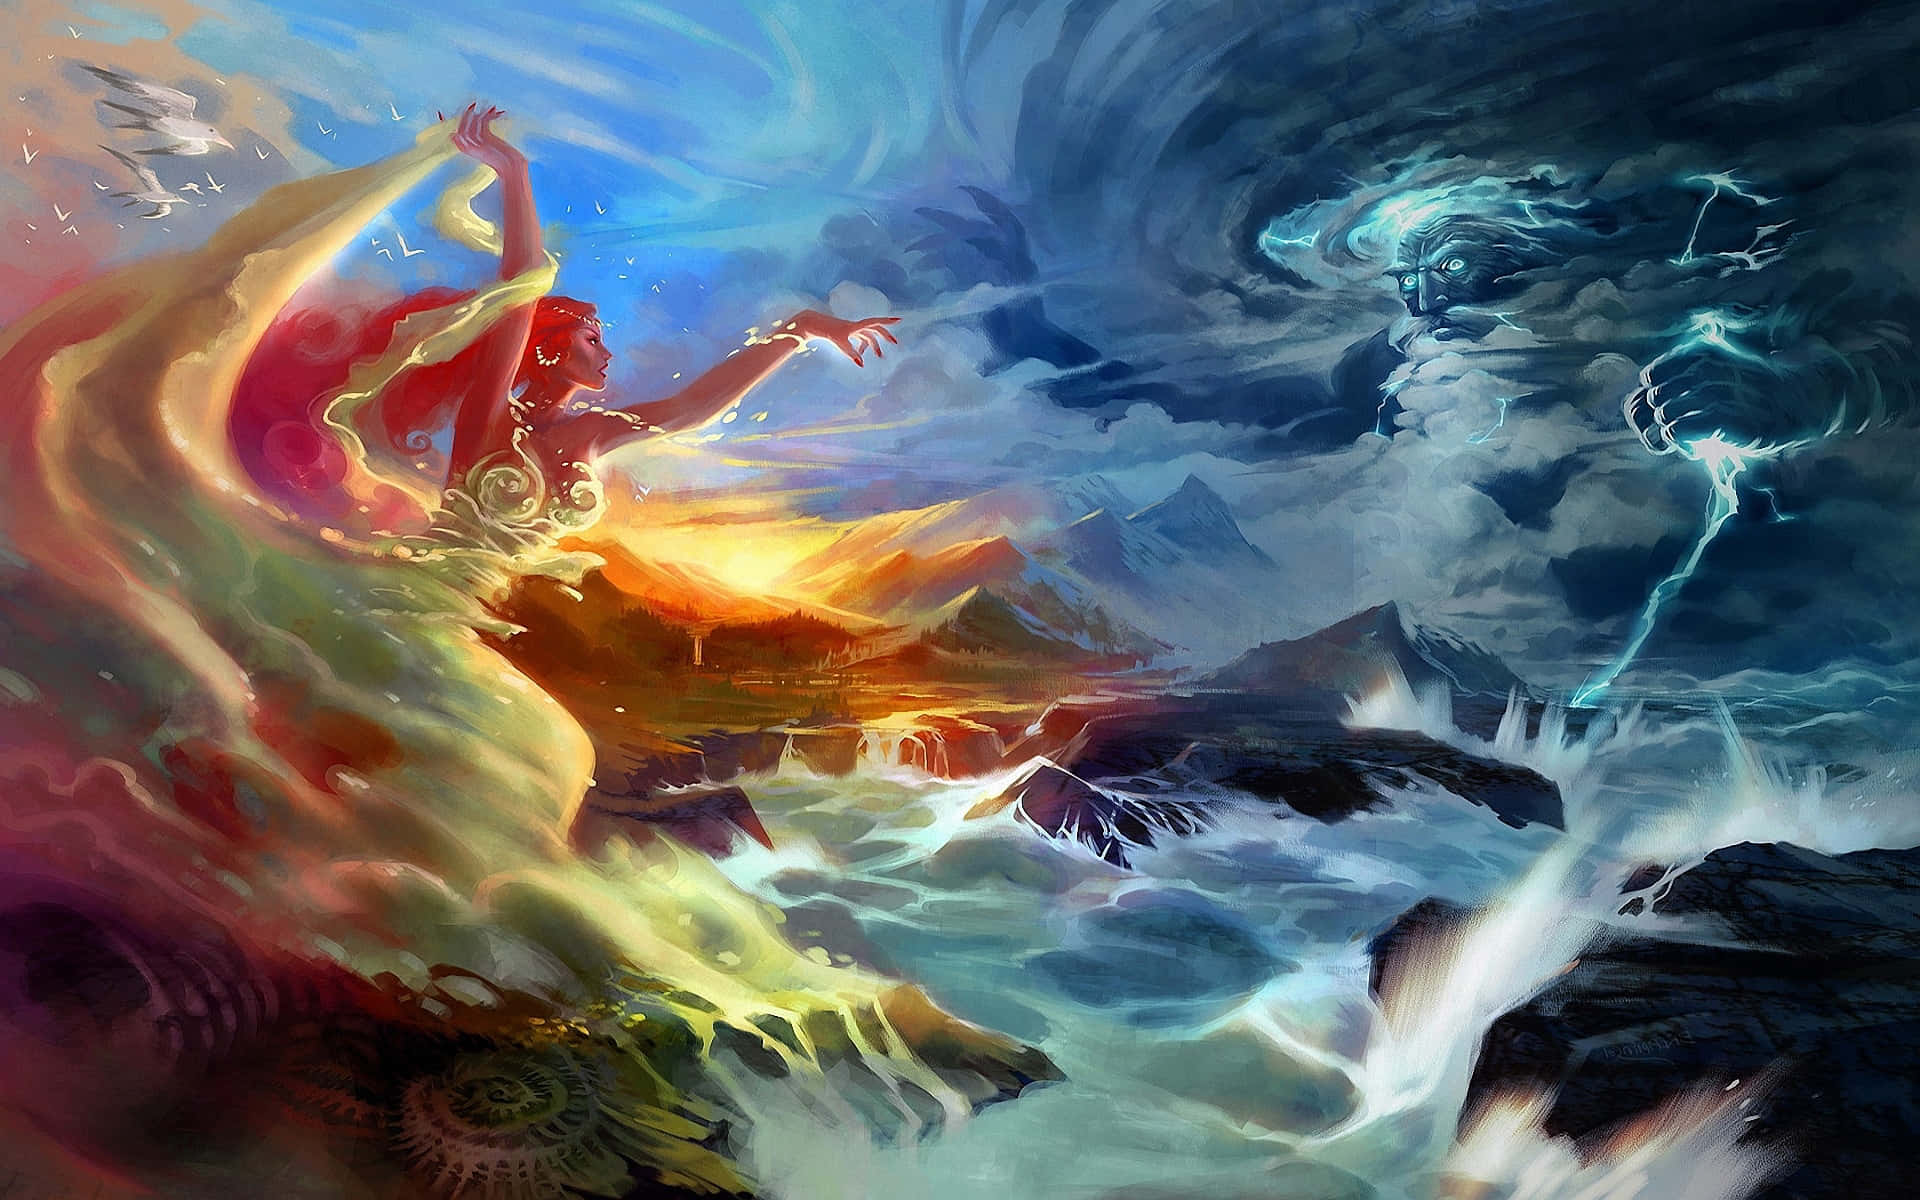 'Witness the epic battle of gods during the times of ancient mythology! Wallpaper